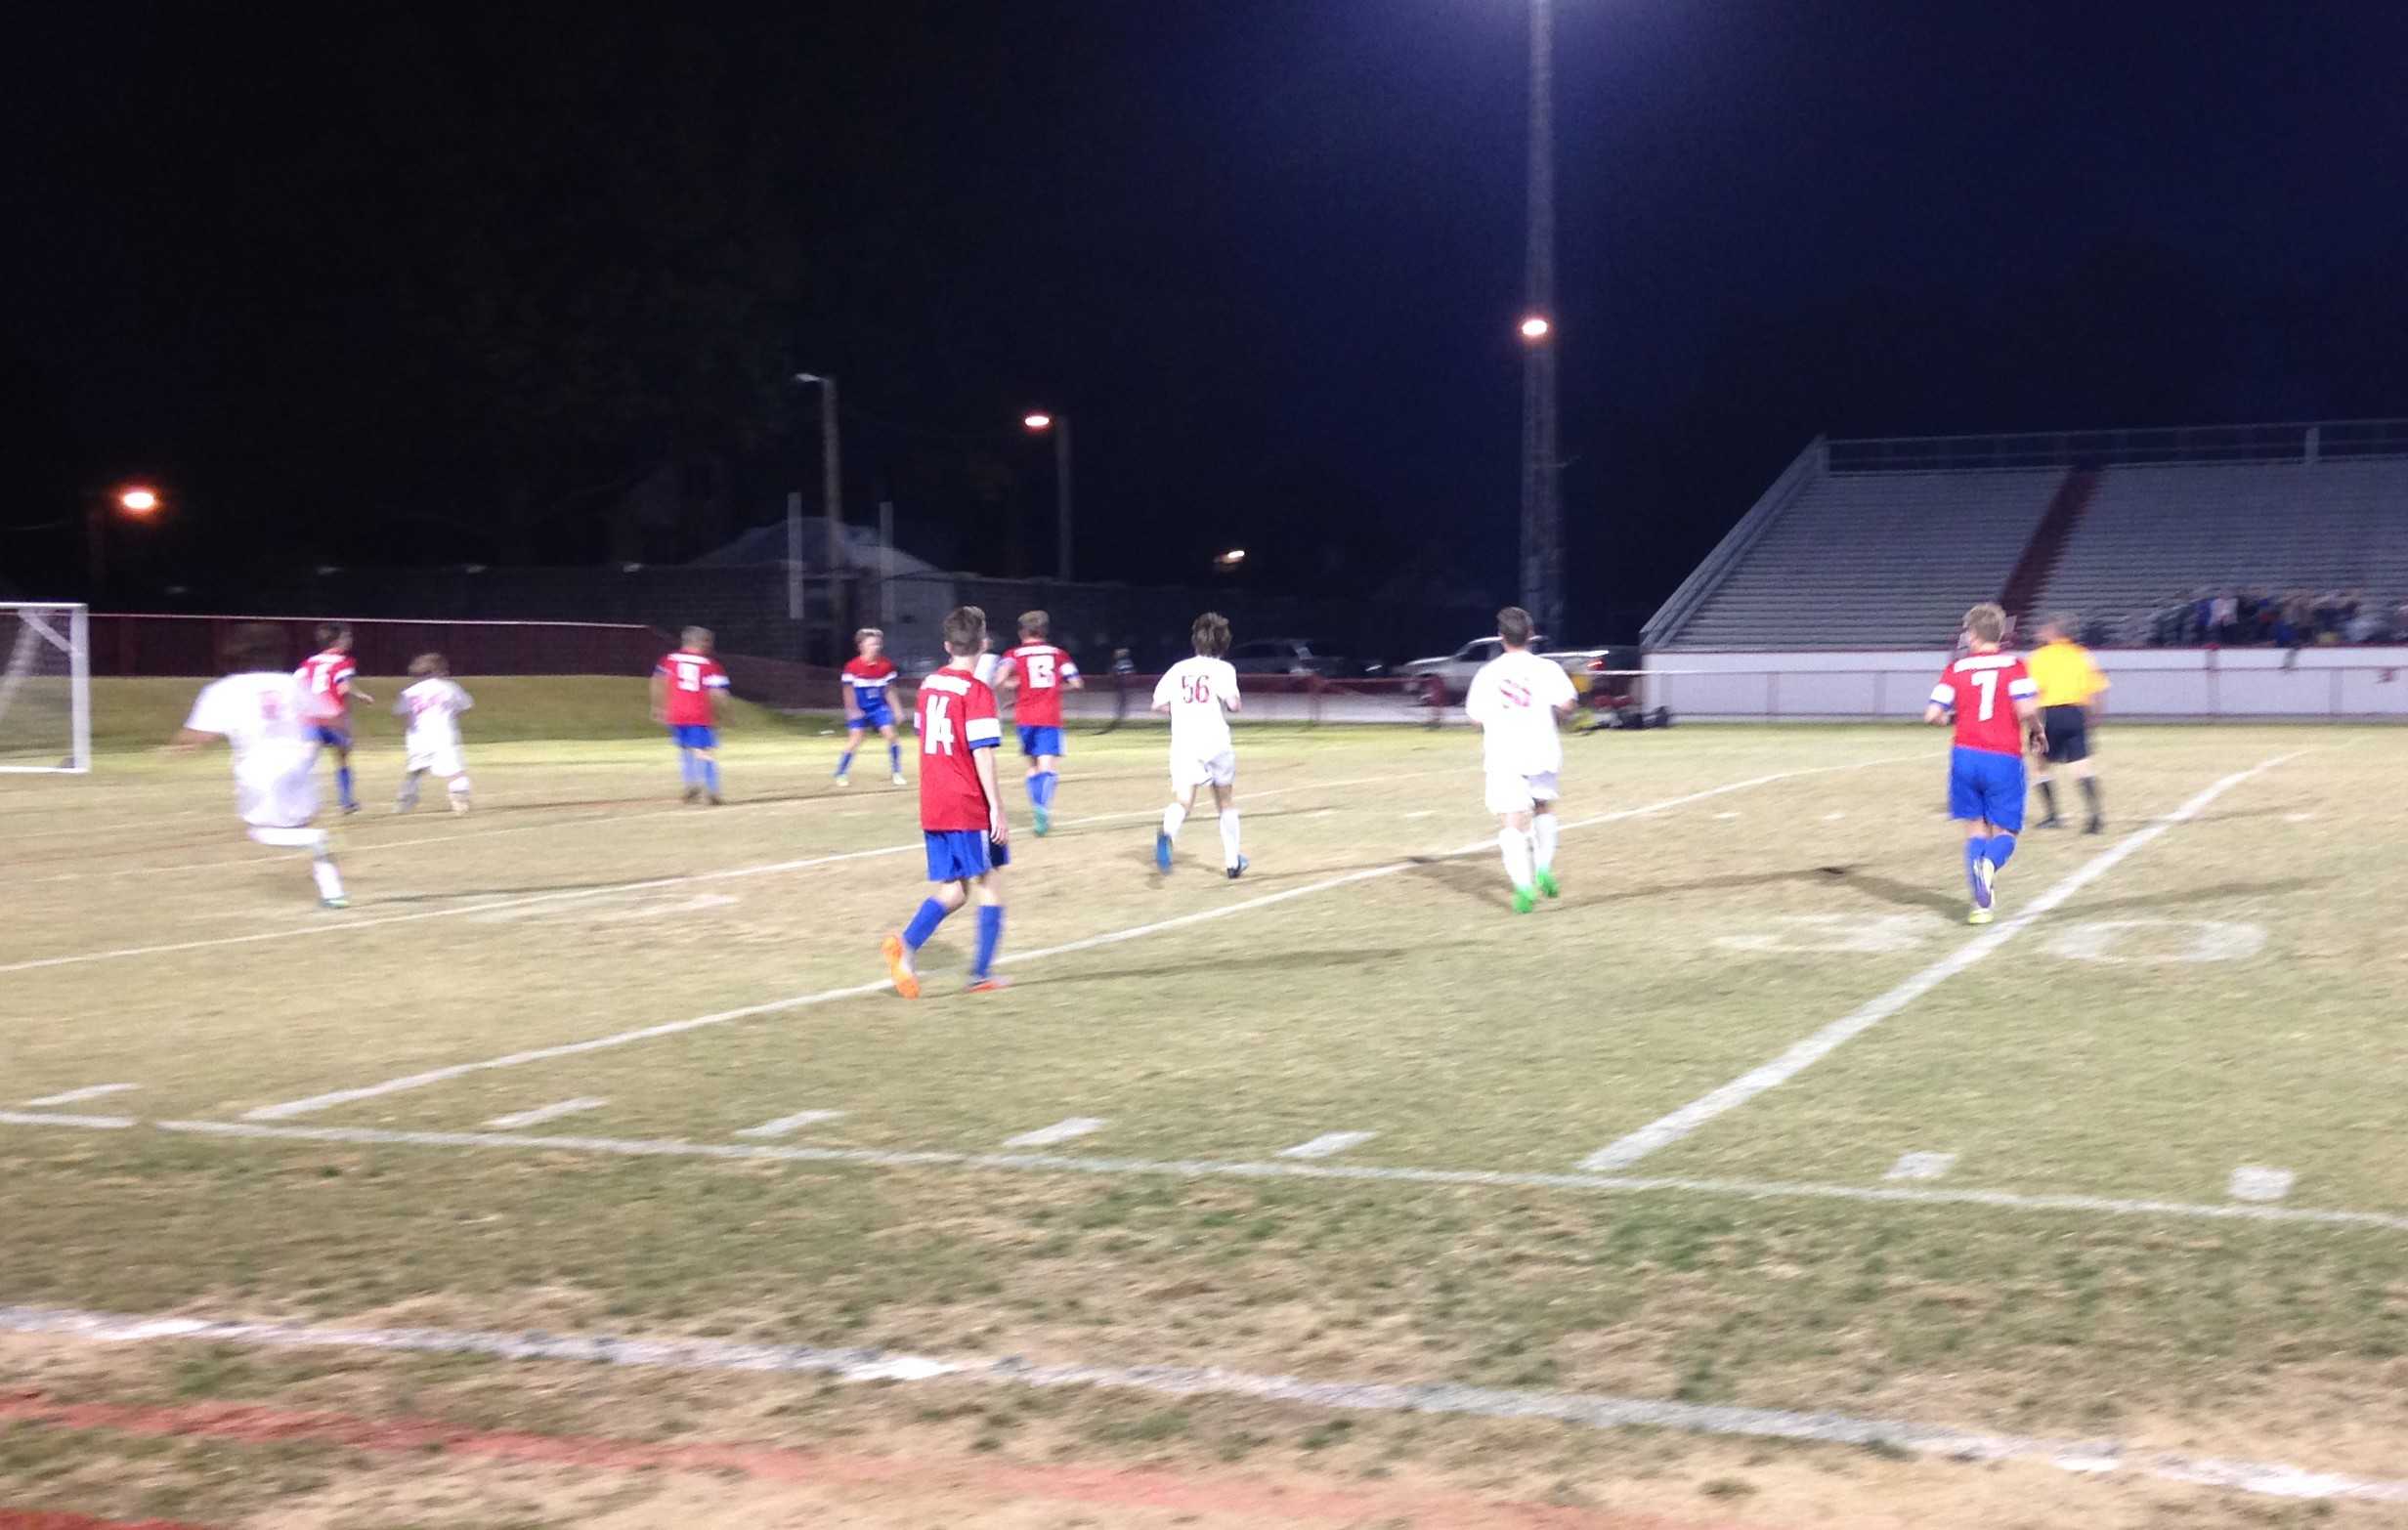 Manual soccer clinches victory by narrow margin